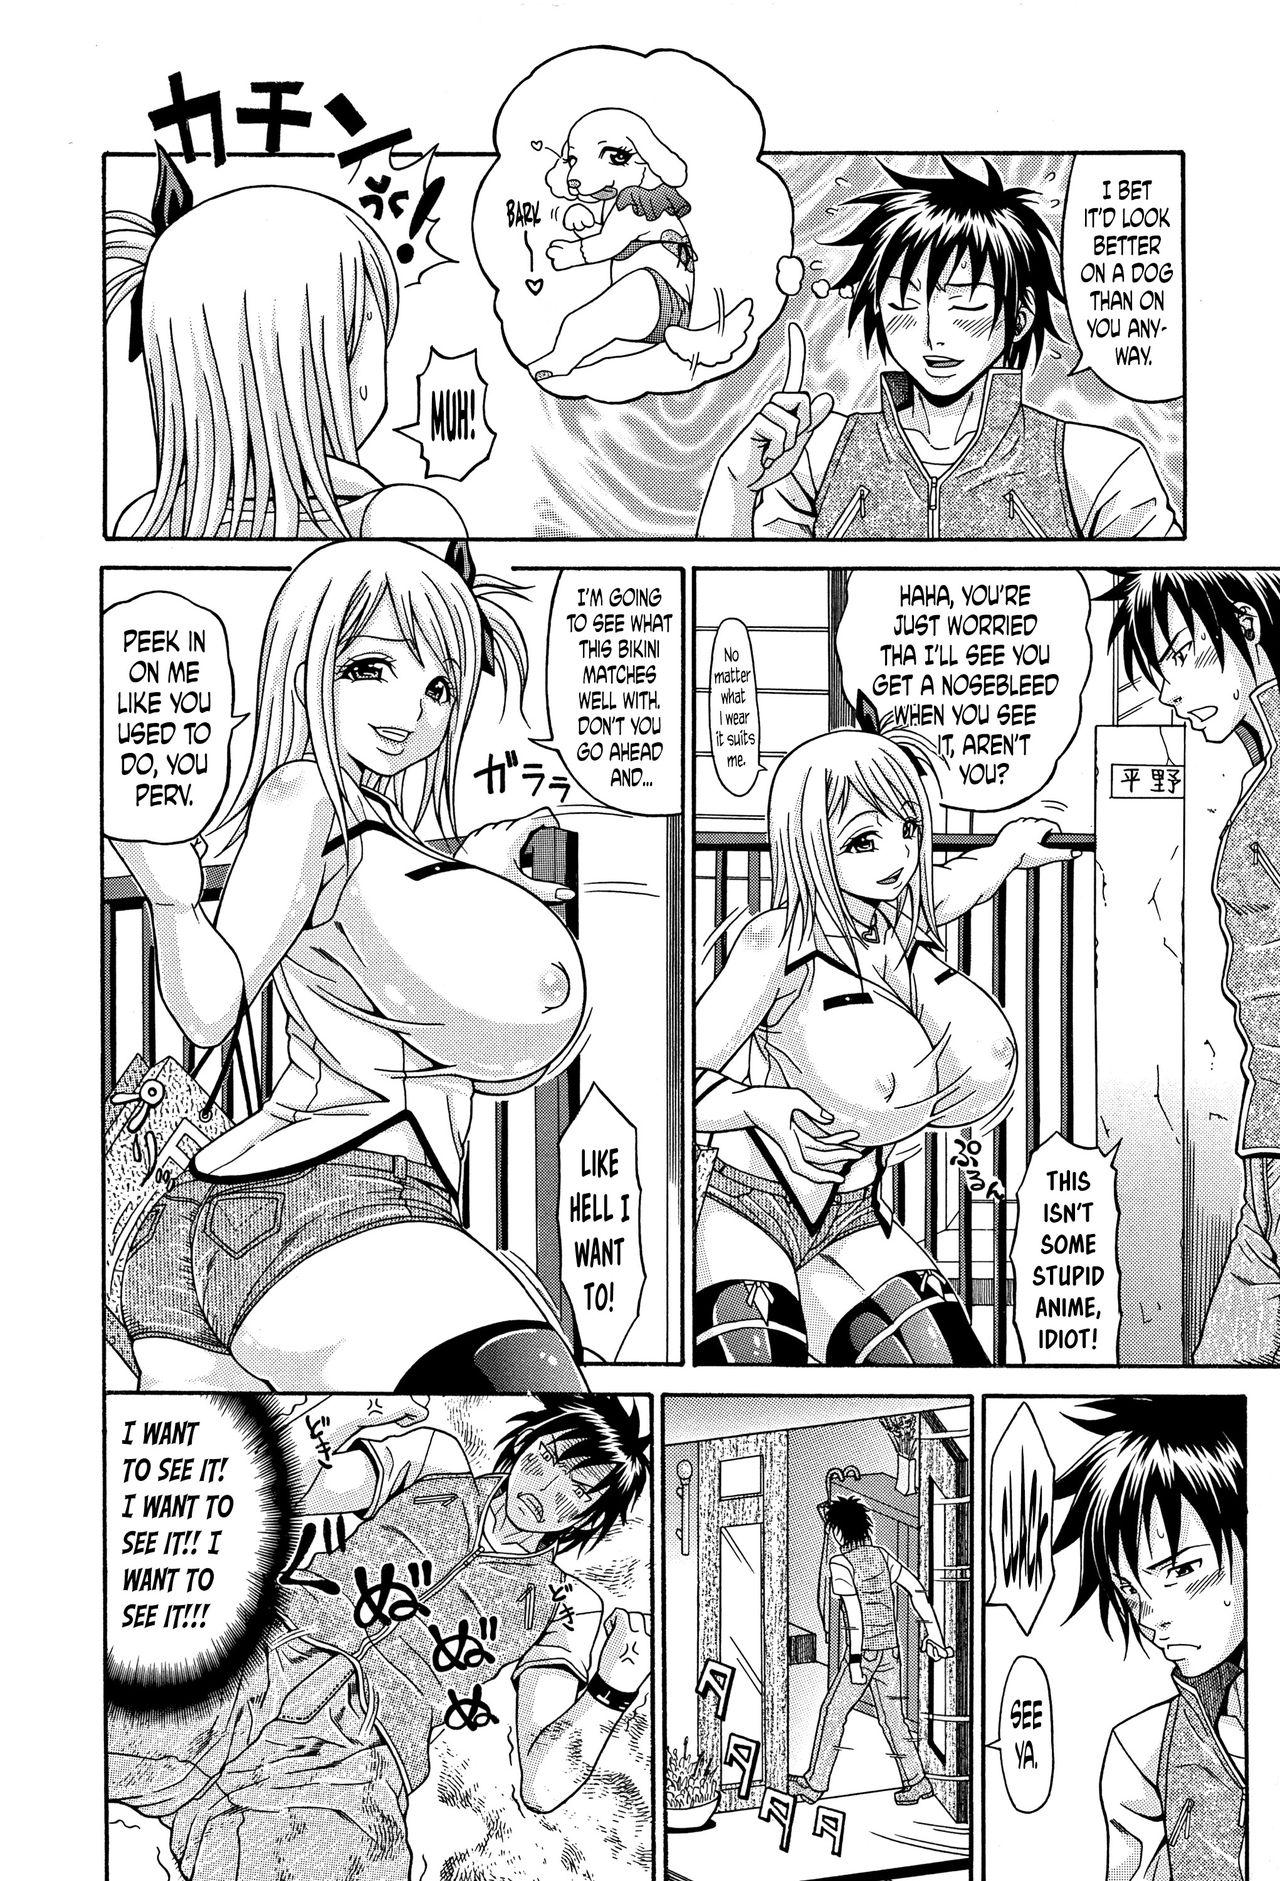 [Andou Hiroyuki] Mamire Chichi - Sticky Tits Feel Hot All Over. Ch.1-8 [English] [doujin-moe.us] 38